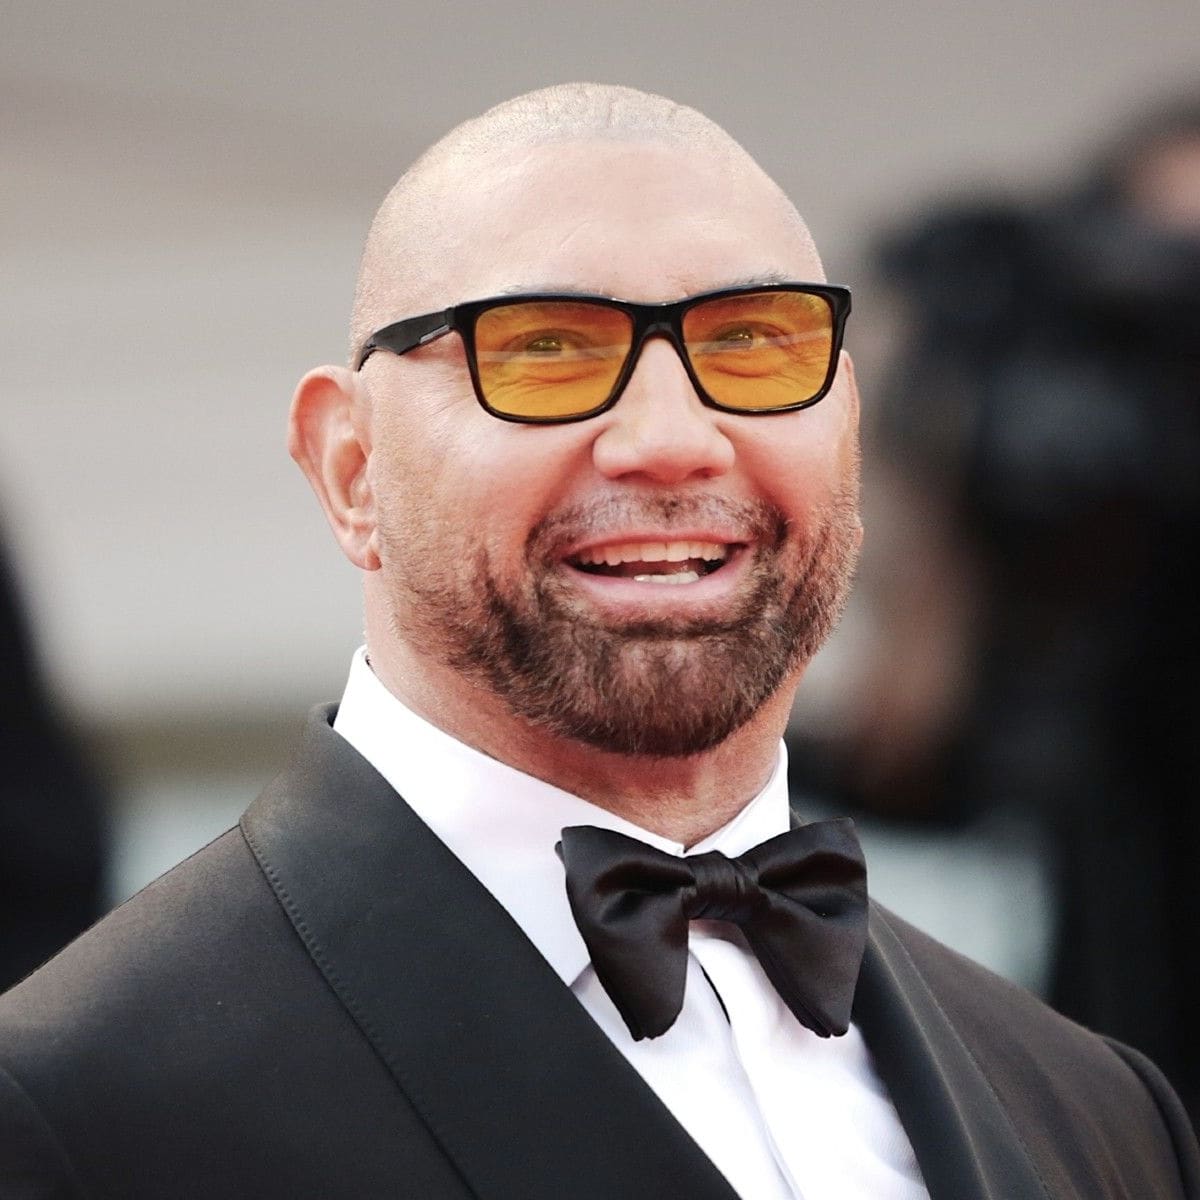 7 Times Dave Bautista Opened Up About His Difficult Childhood